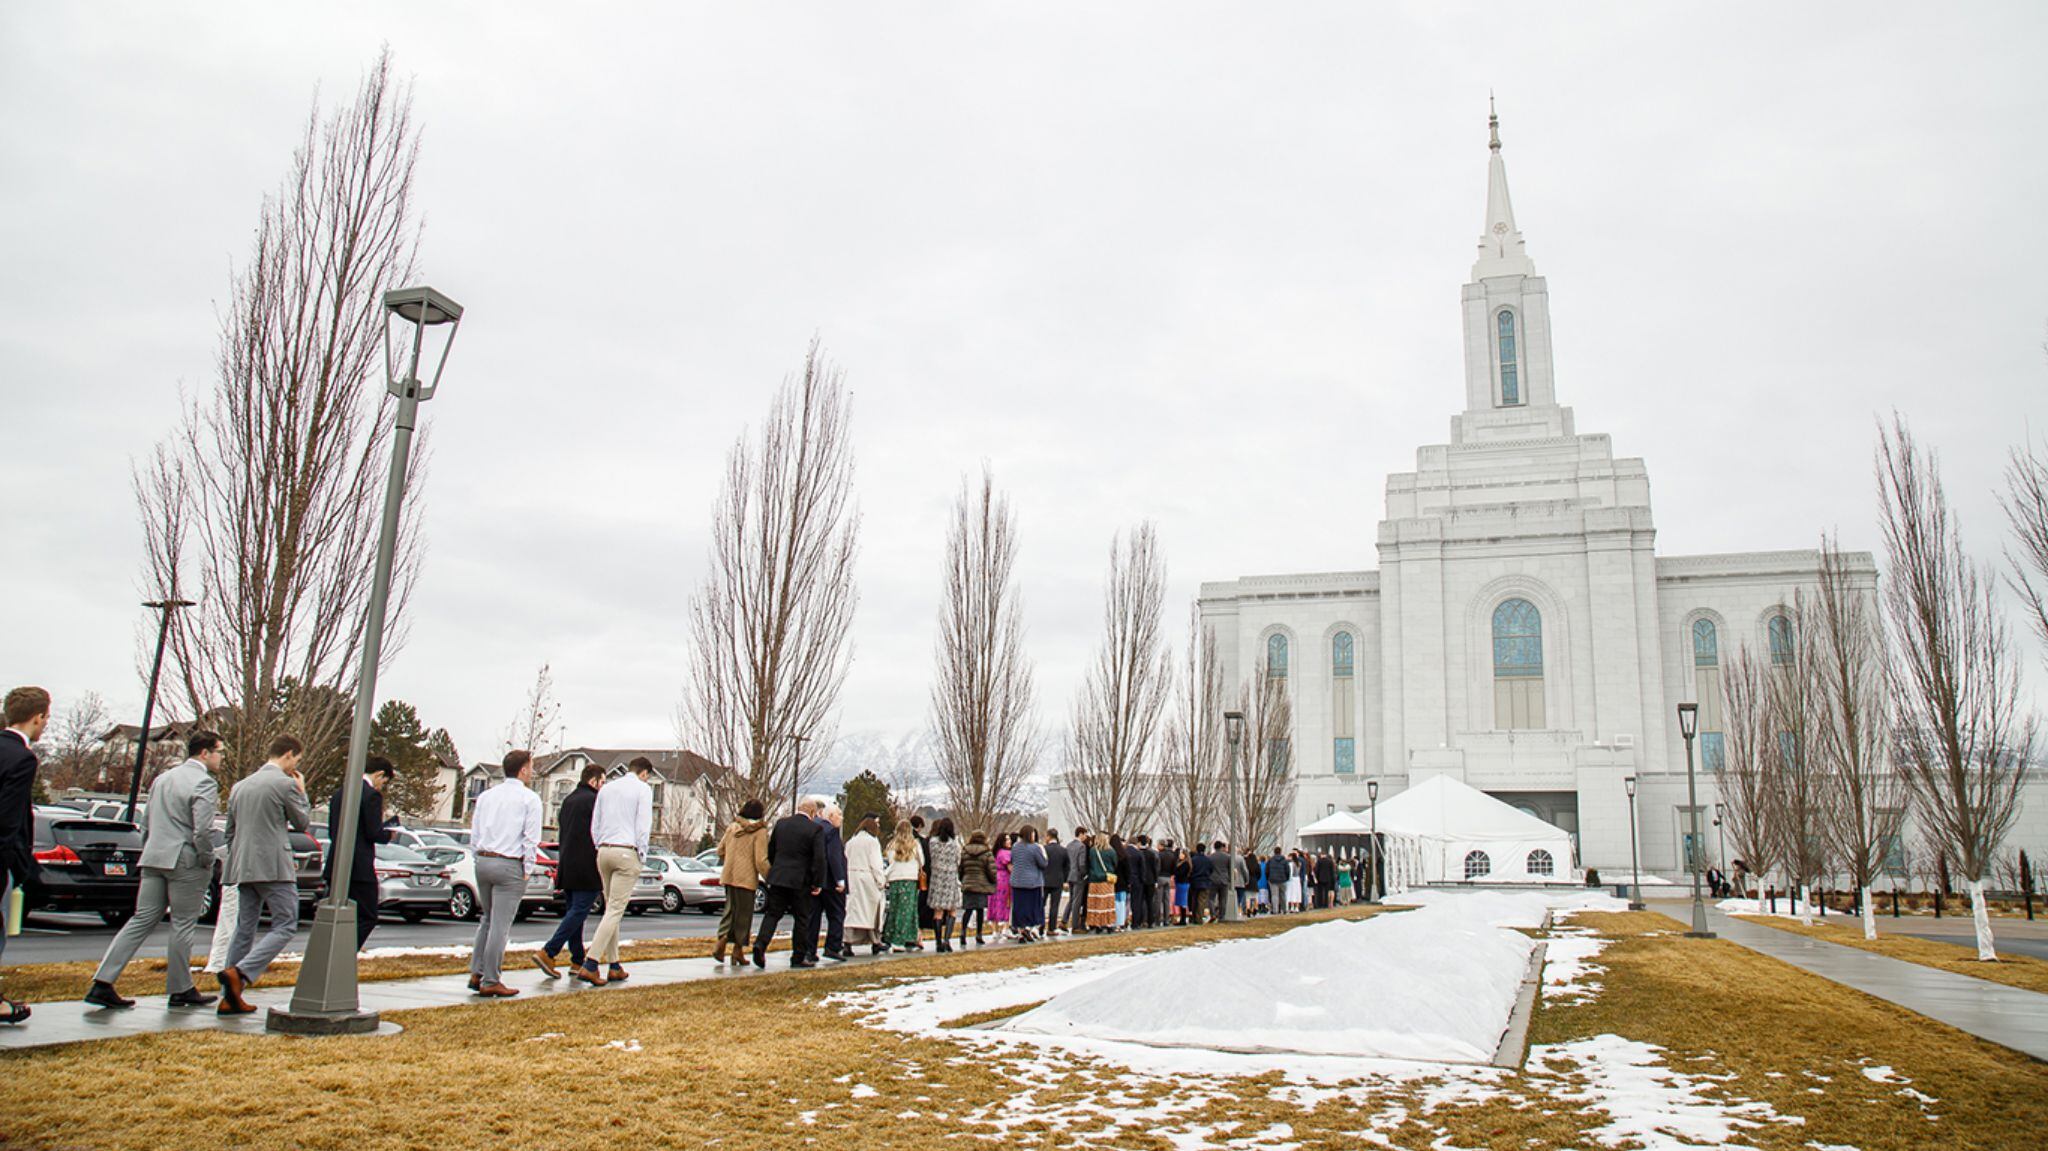 (The Church of Jesus Christ of Latter-day Saints) The Orem Temple was dedicated on Sunday.